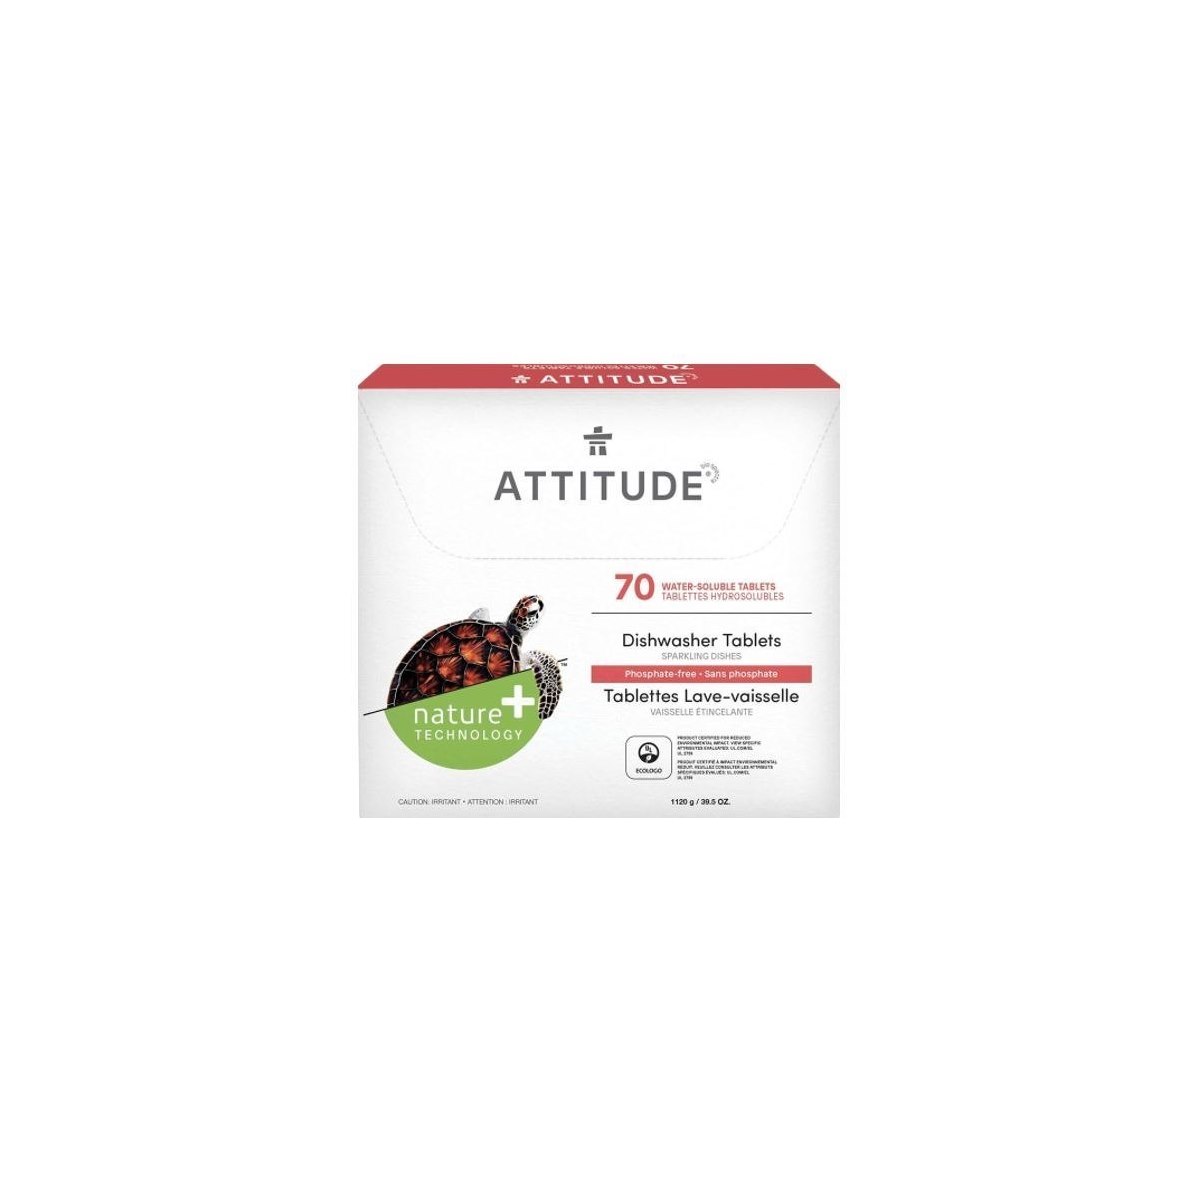 Attitude Dishwasher Tablets Pack of 70